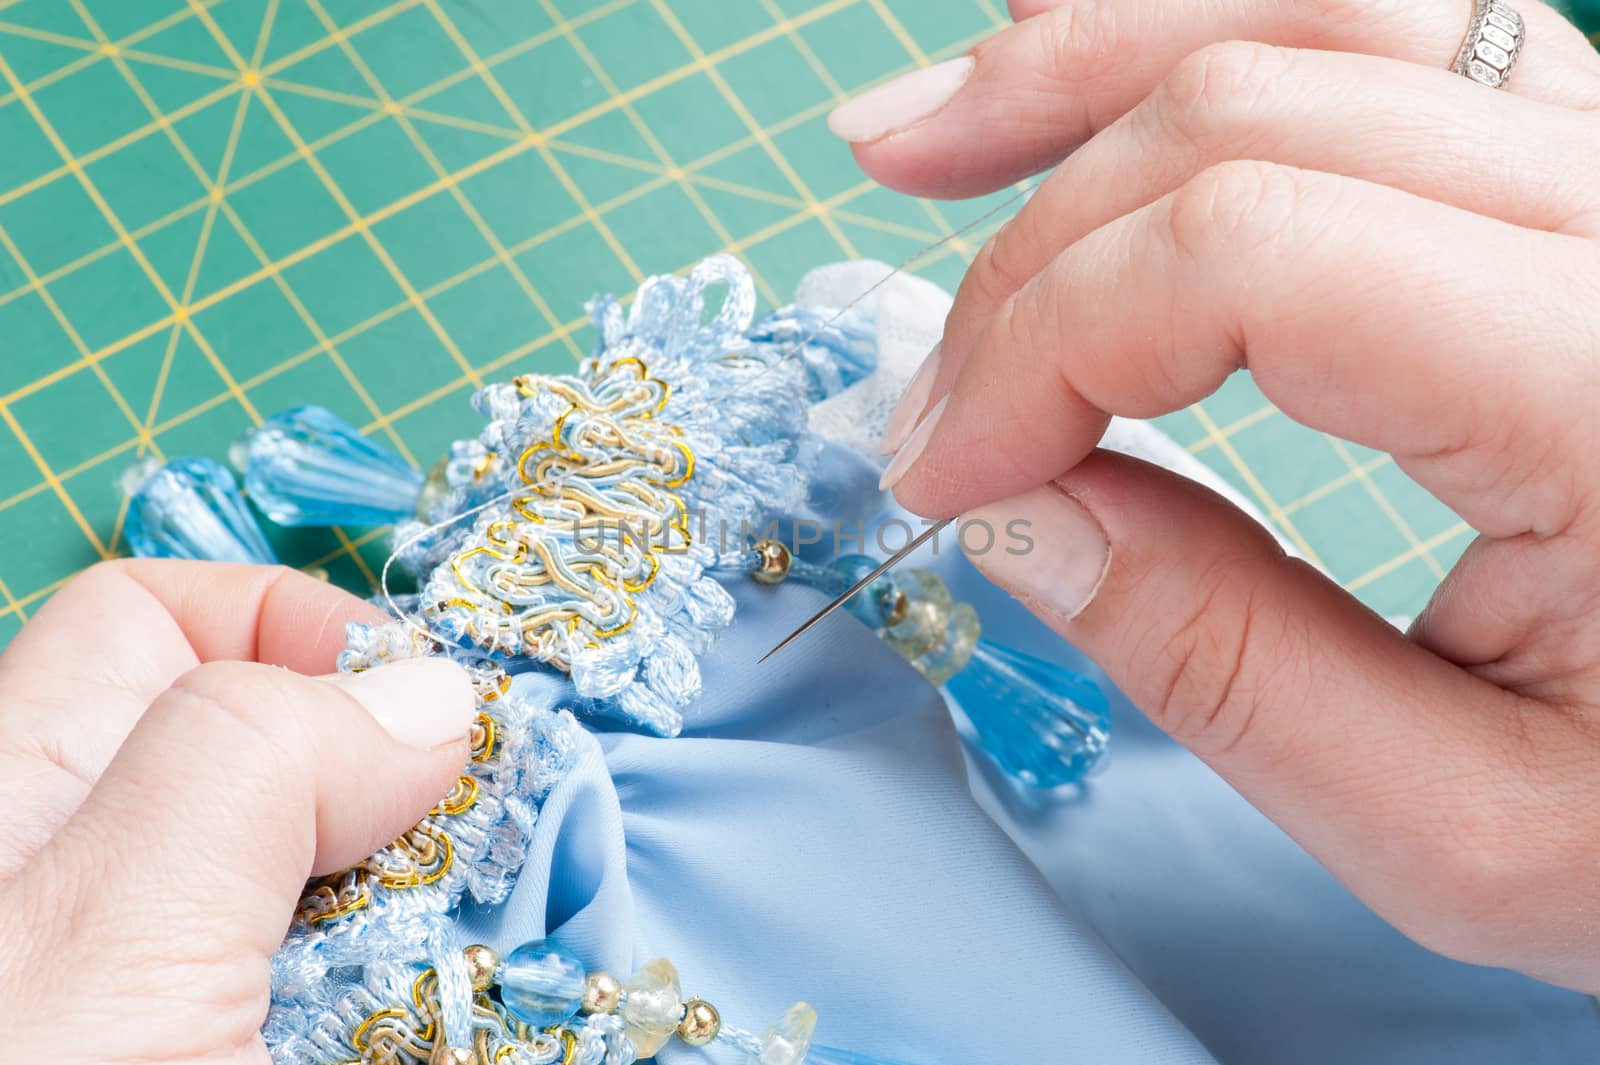 A woman sews a decorative element to clothes with a needle